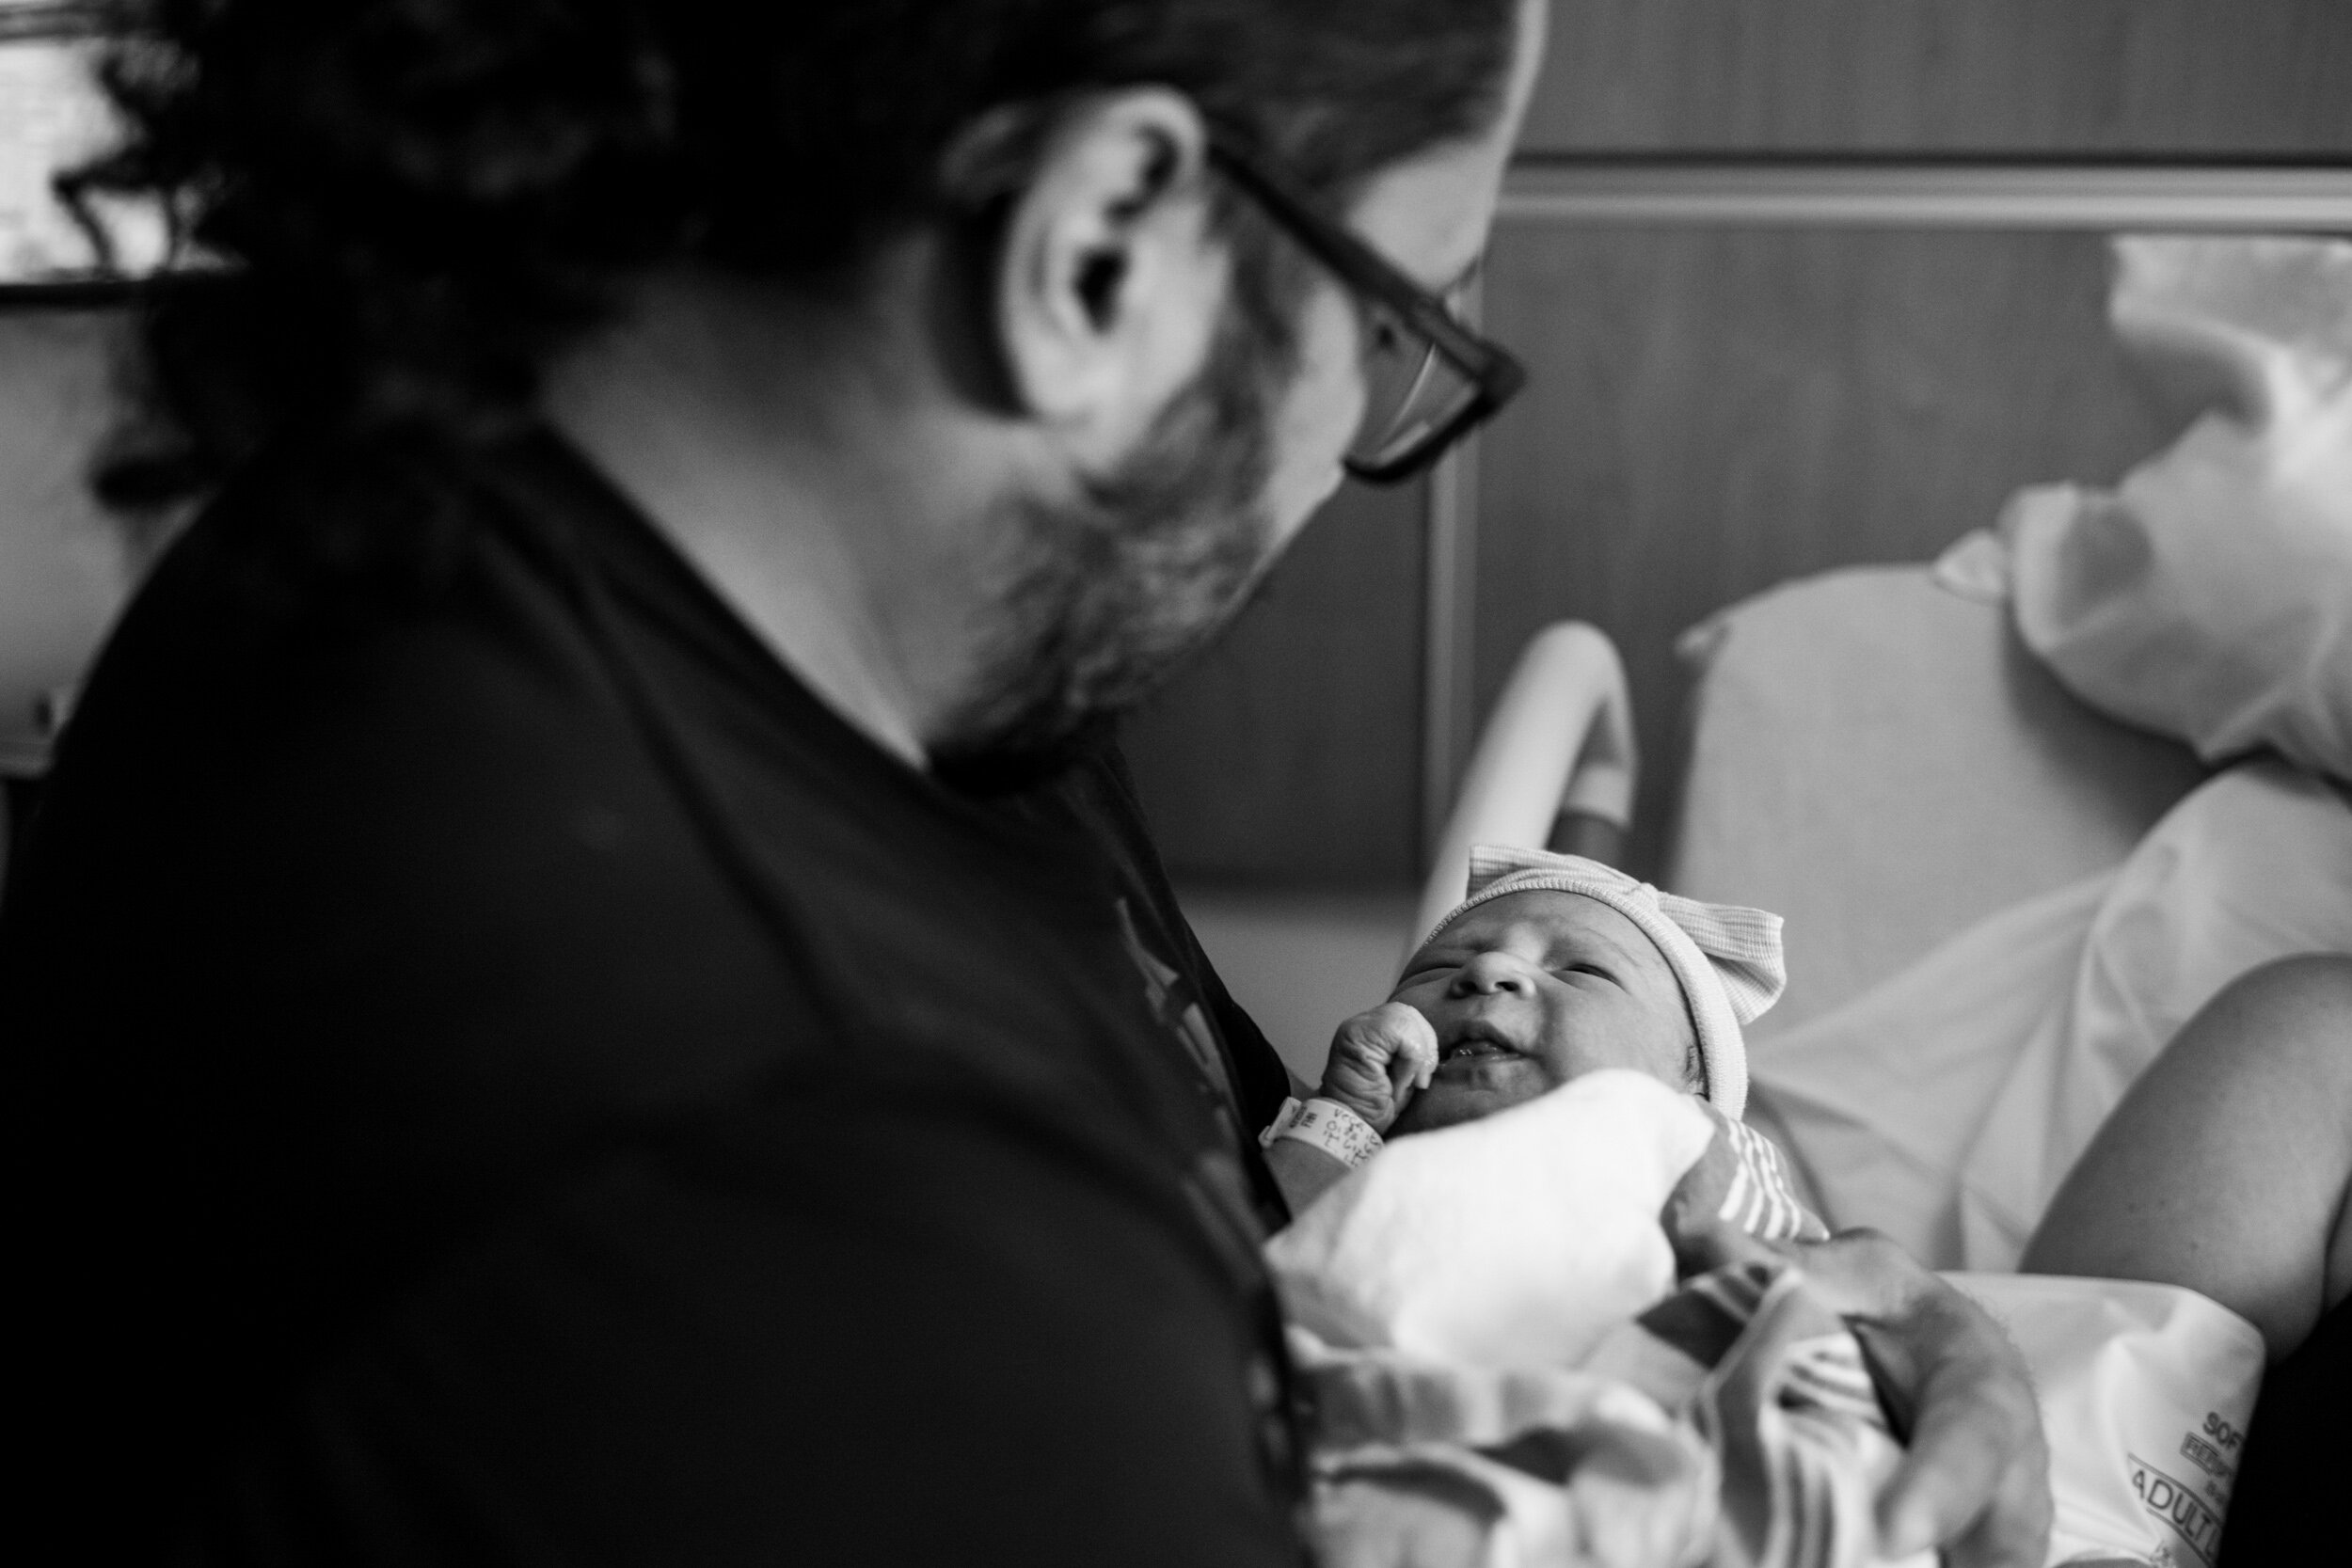 jacksonville dad holding his newborn baby girl just after birth